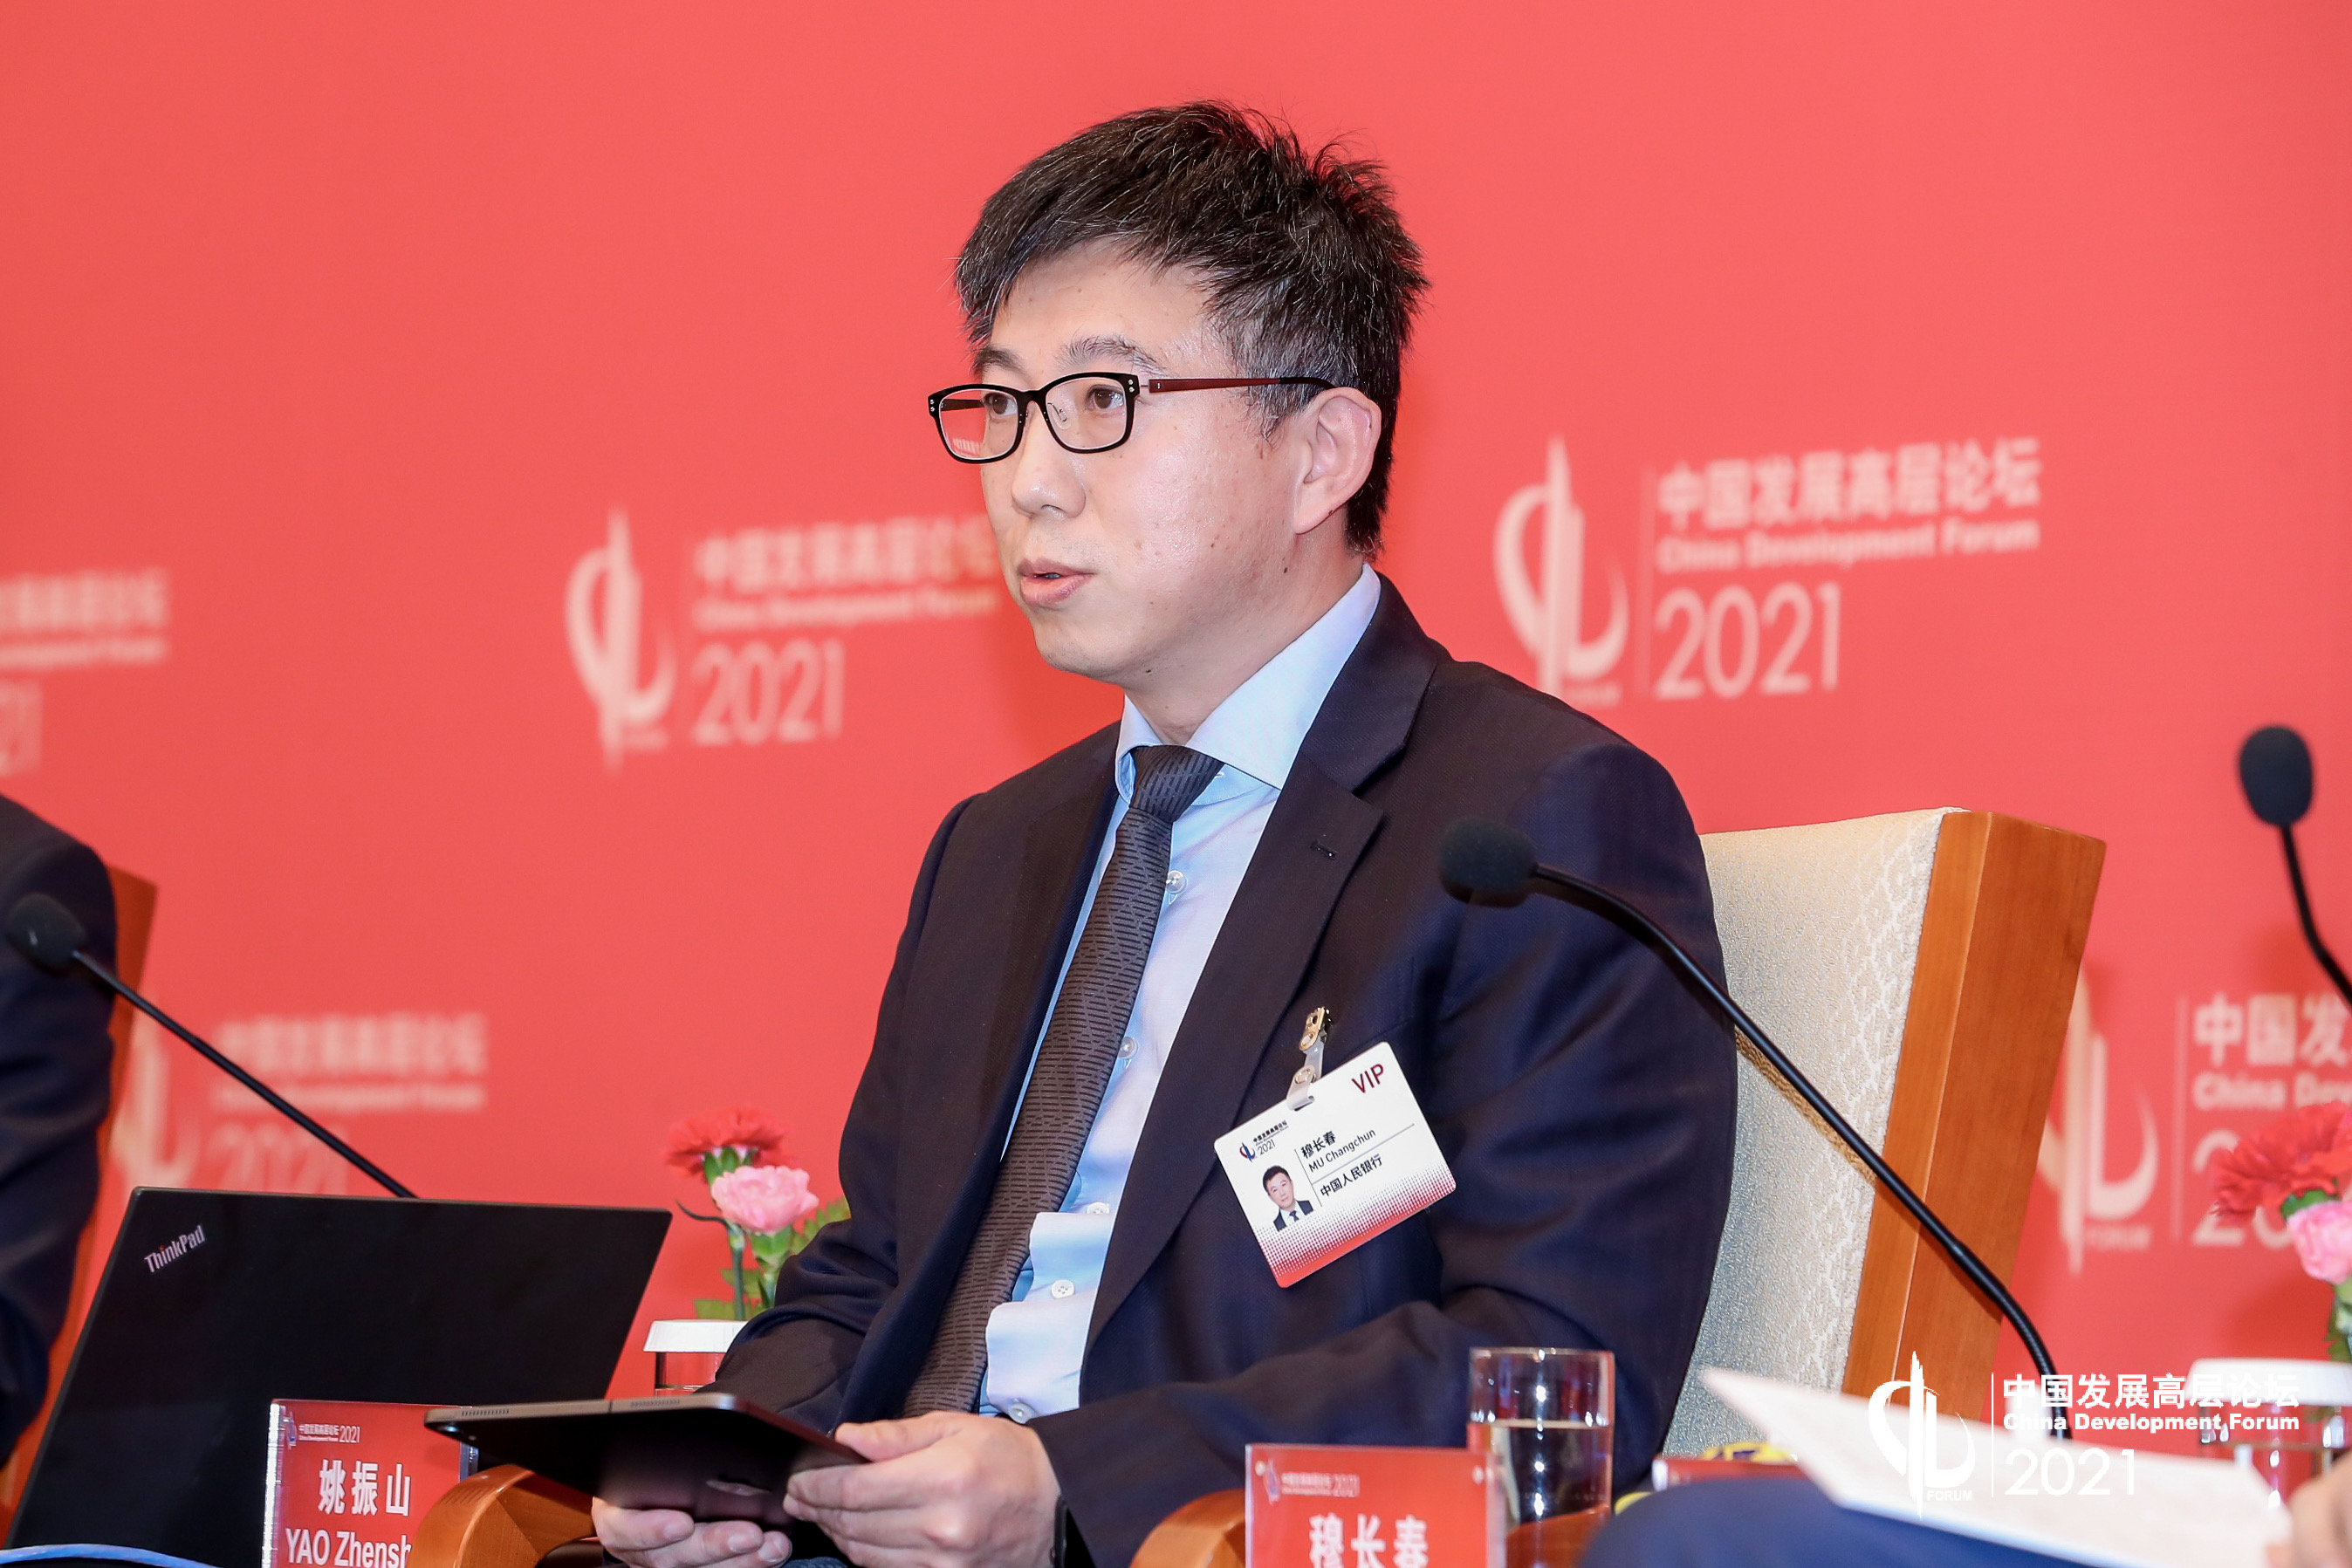 Mu Changchun, Director of the Central Bank Digital Currency Research Institute